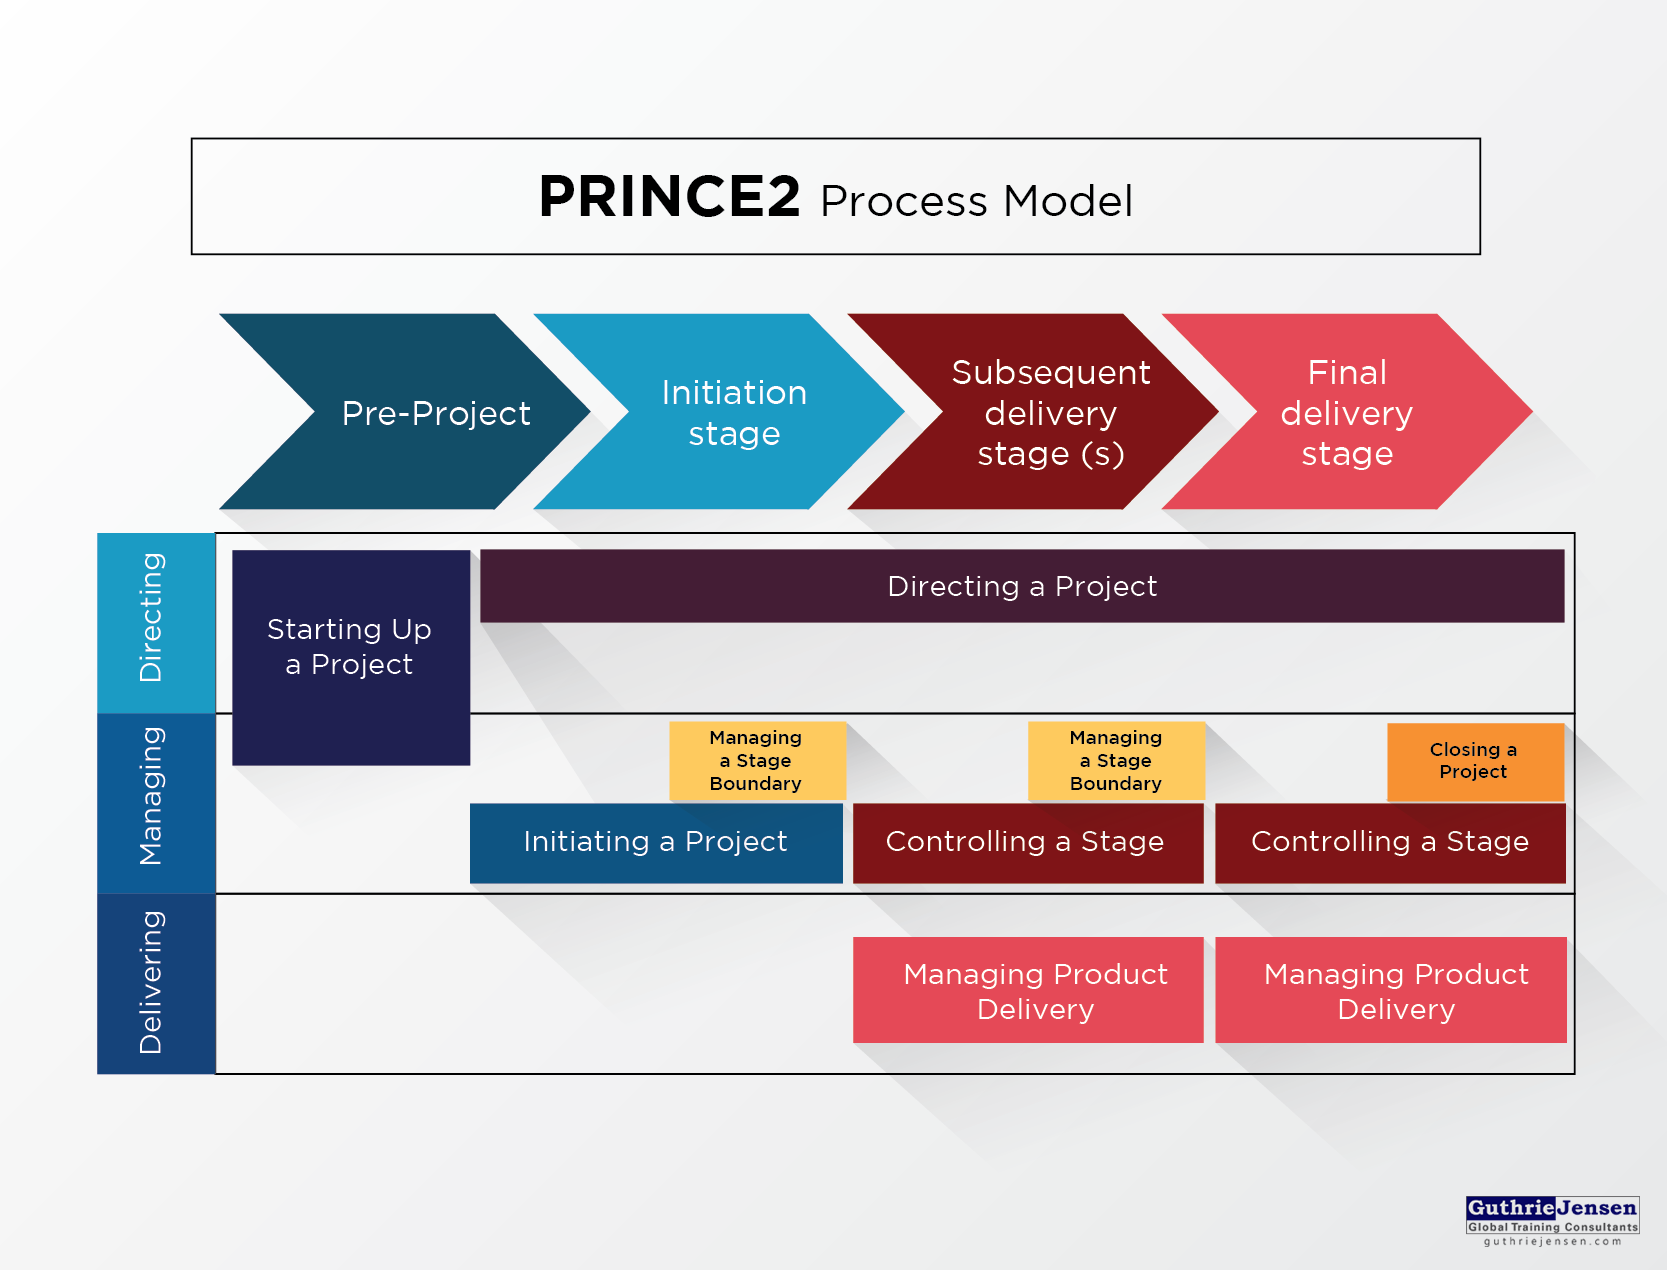 Project Management Phases and Processes - Structuring Your Project